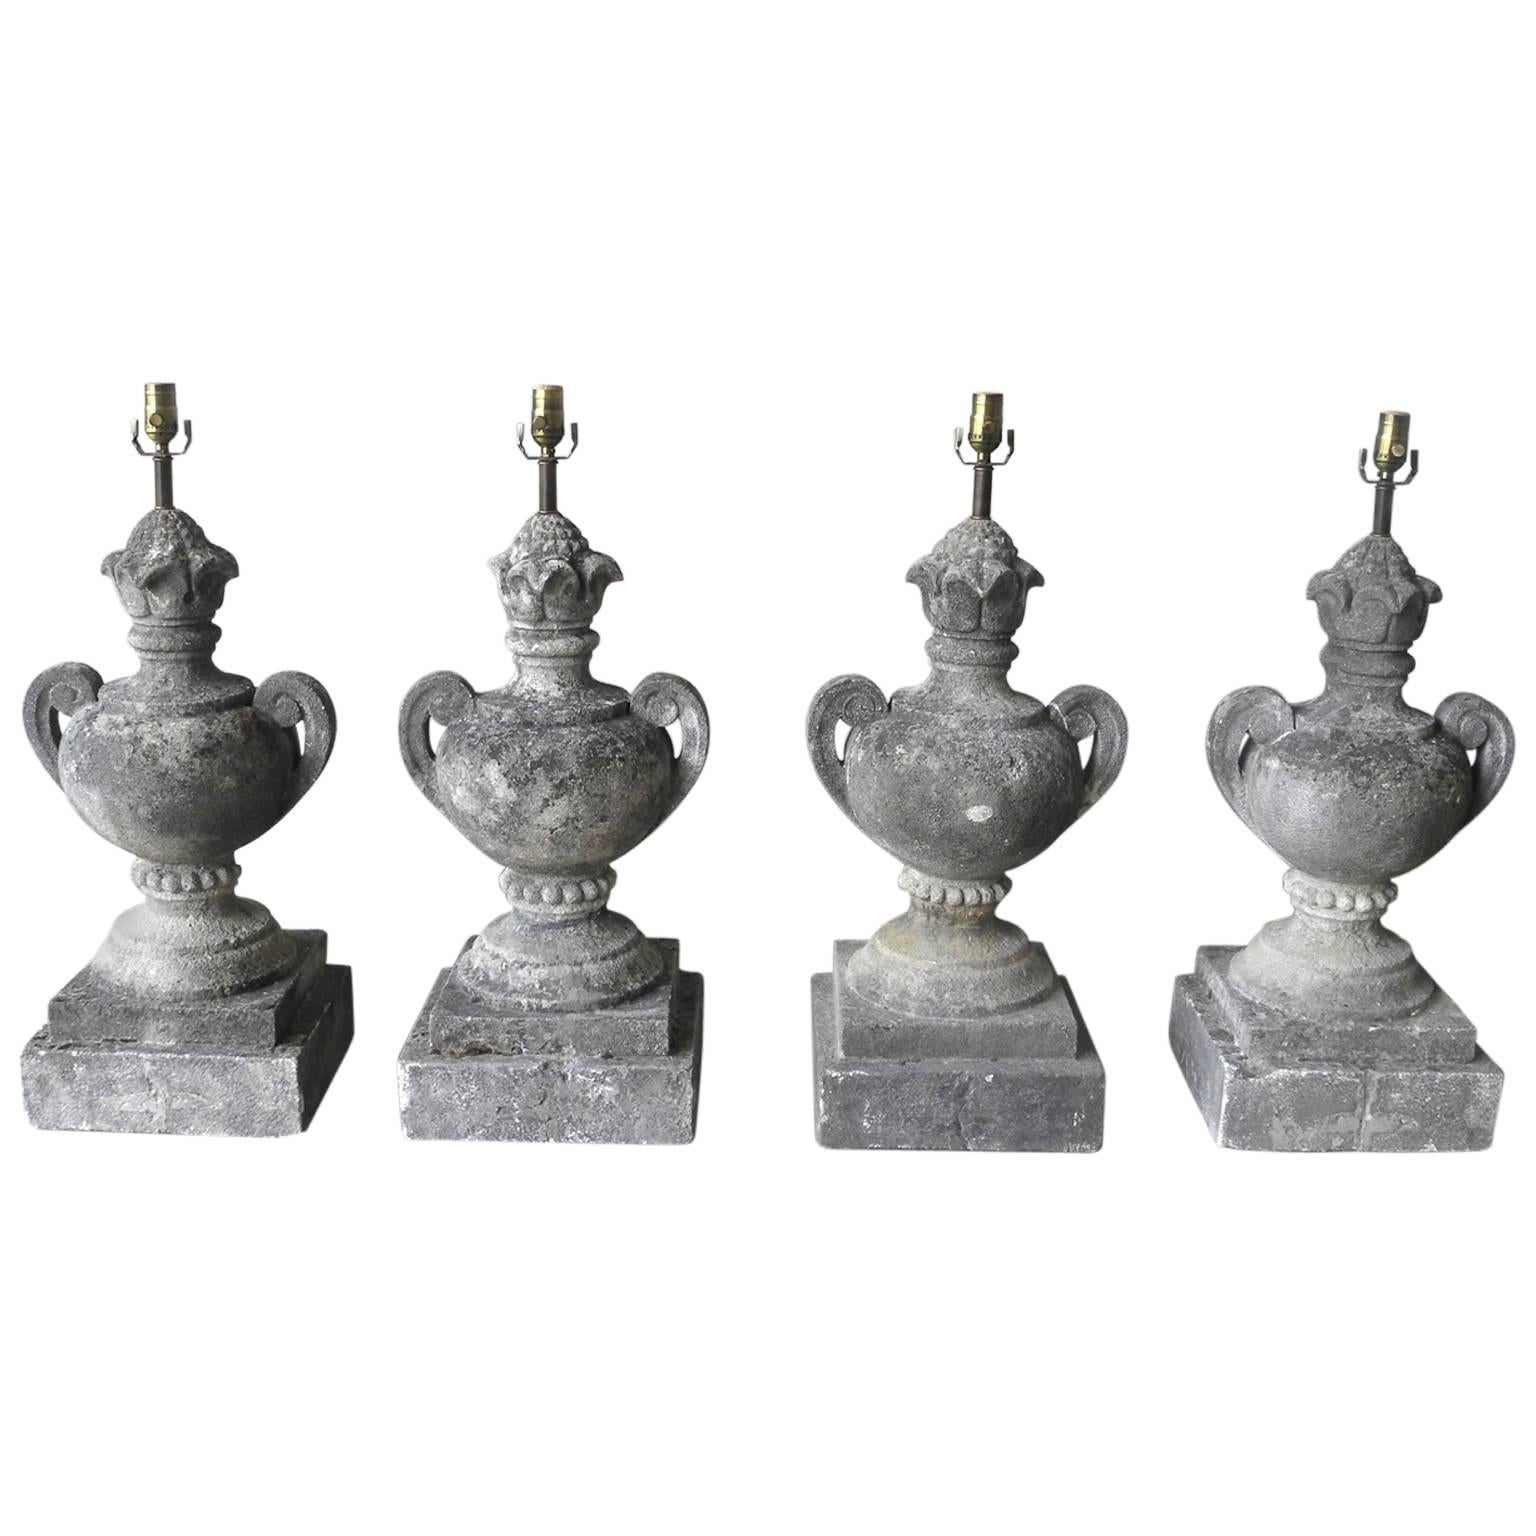 Set of Four Antique French Carved Limestone Elements Turned into Lamps